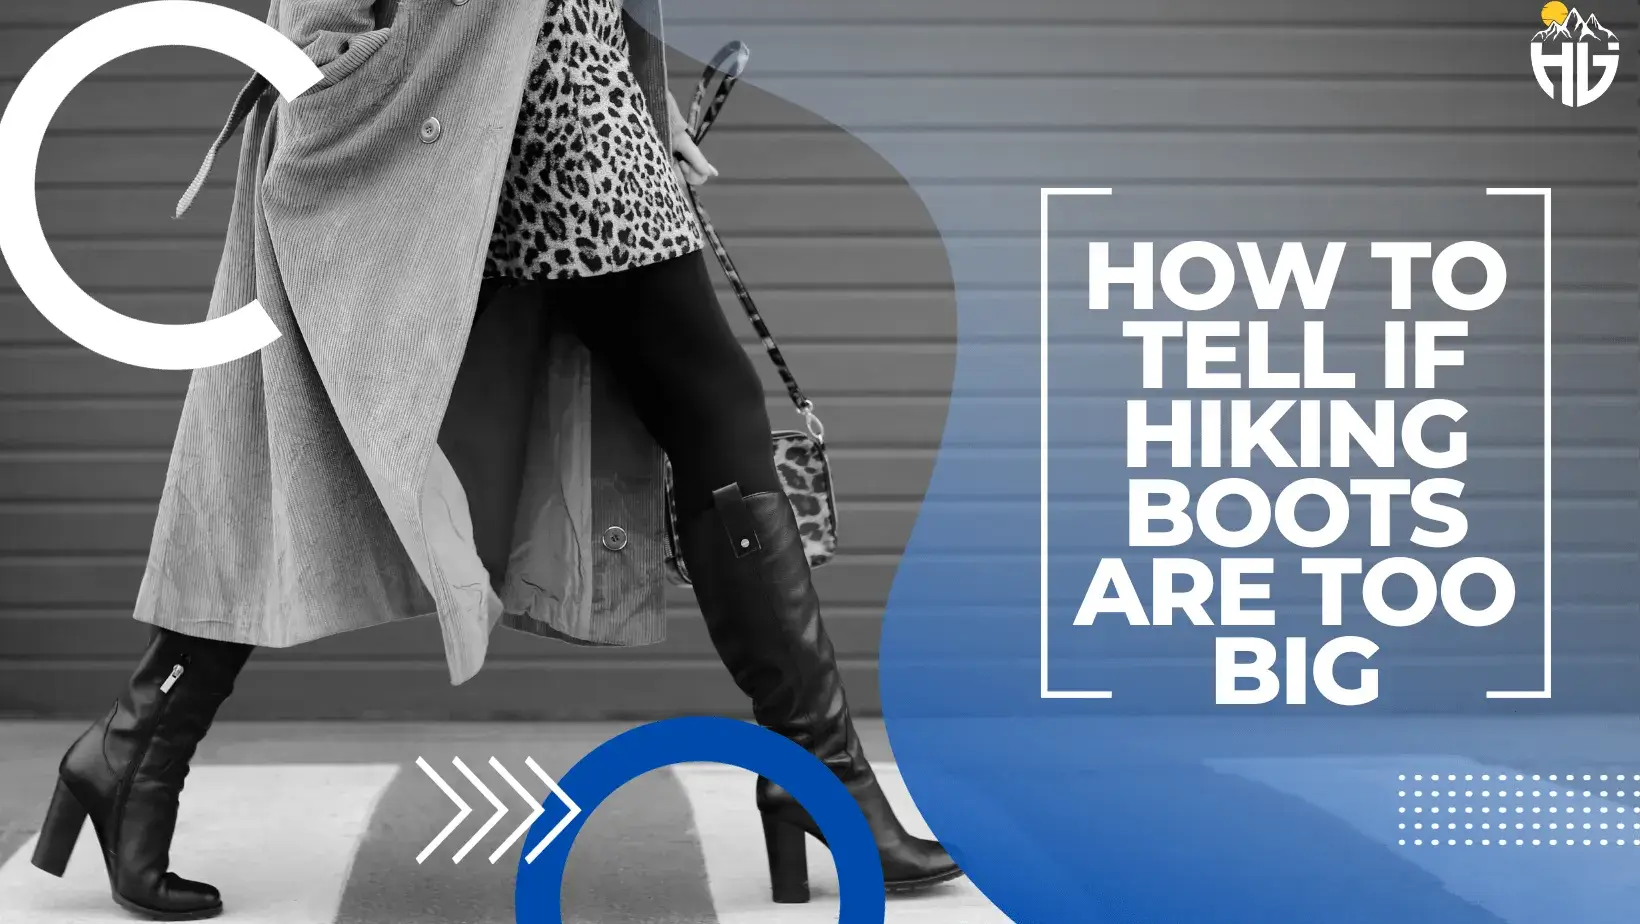 How to Tell if Hiking Boots are Too Big